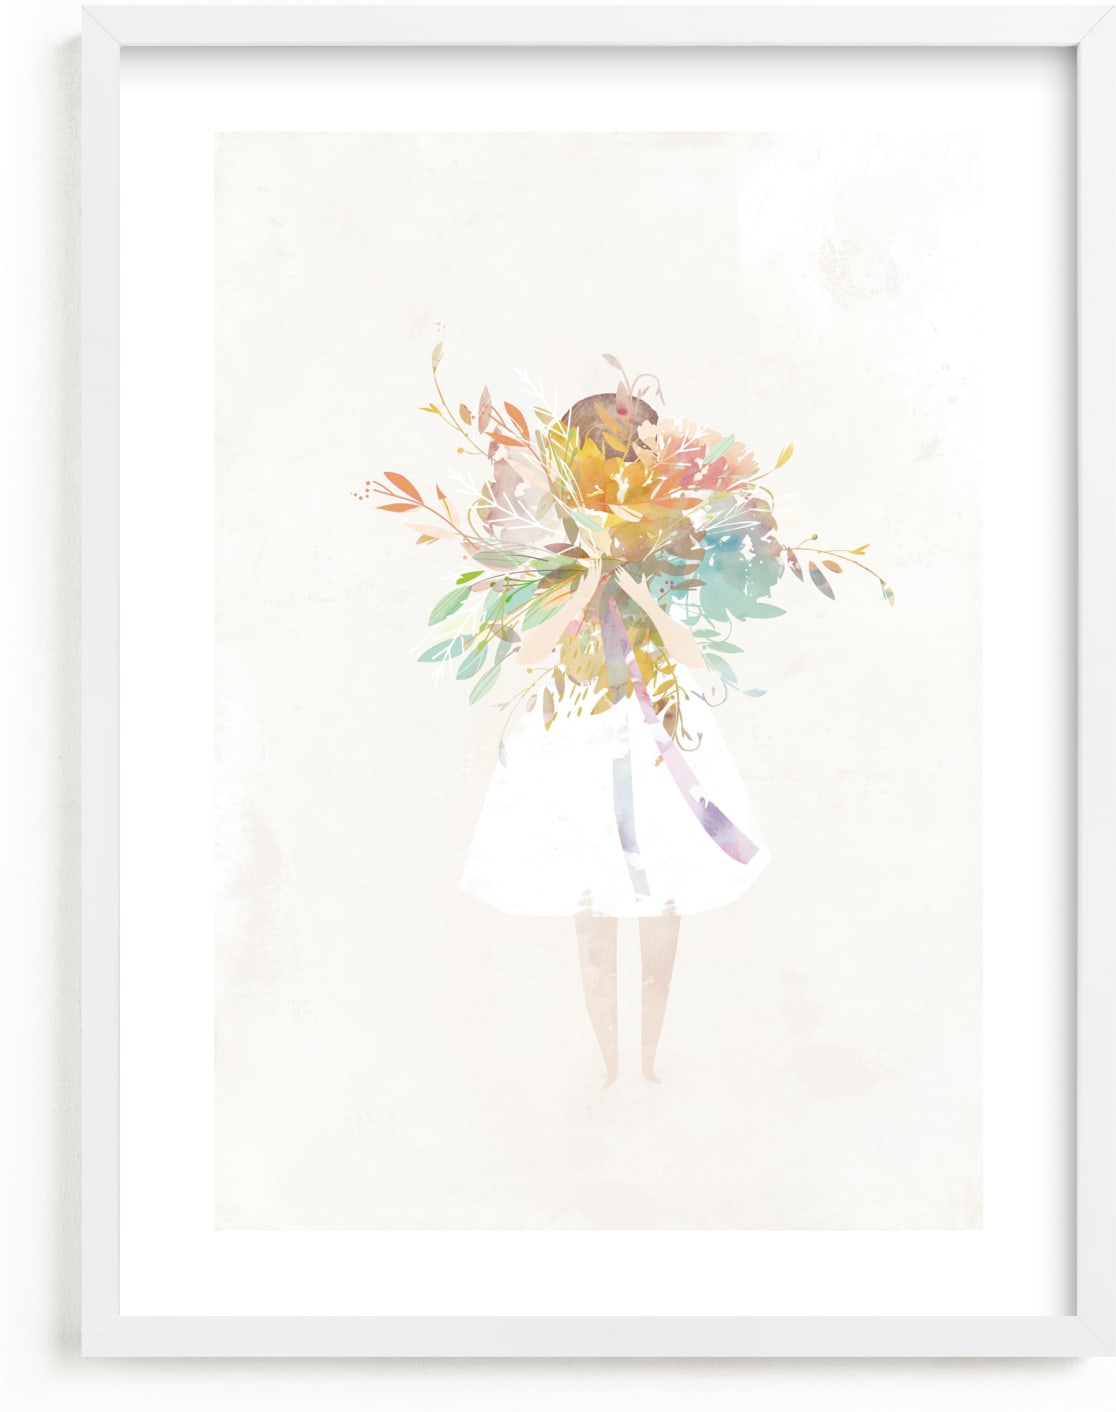 This is a colorful kids wall art by Lori Wemple called The Flower Girl.